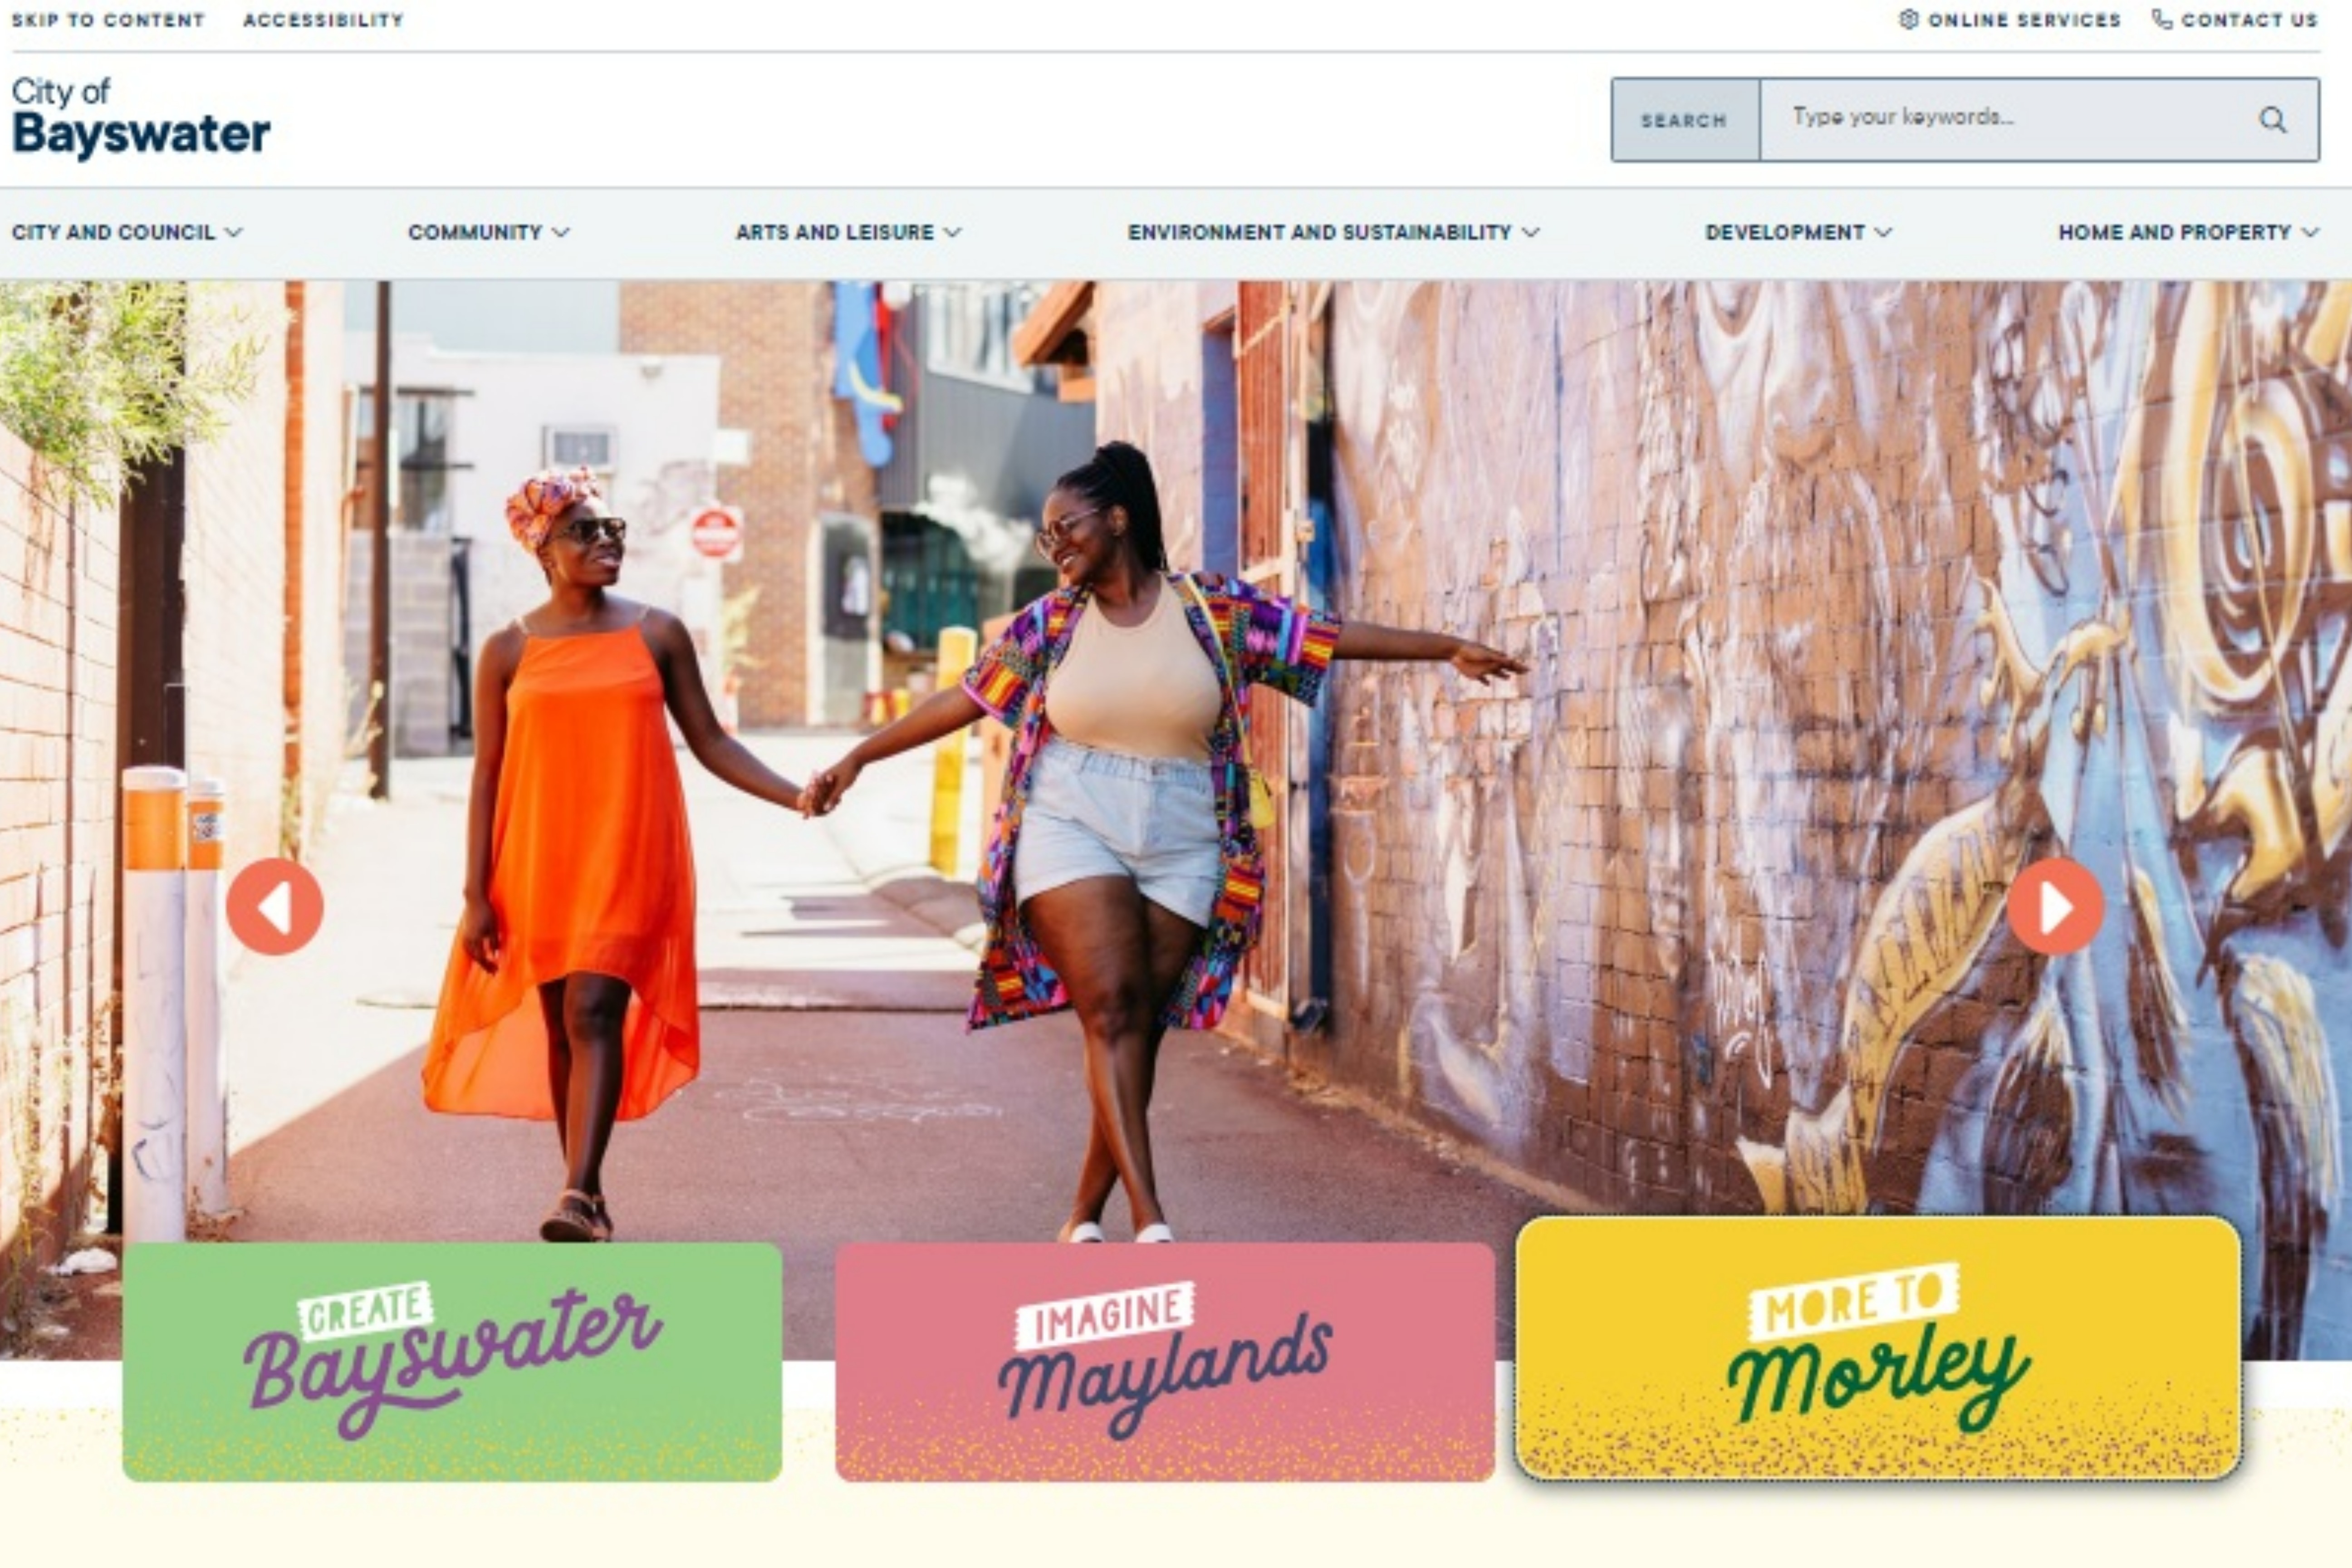 City website launches destination section to attract visitors